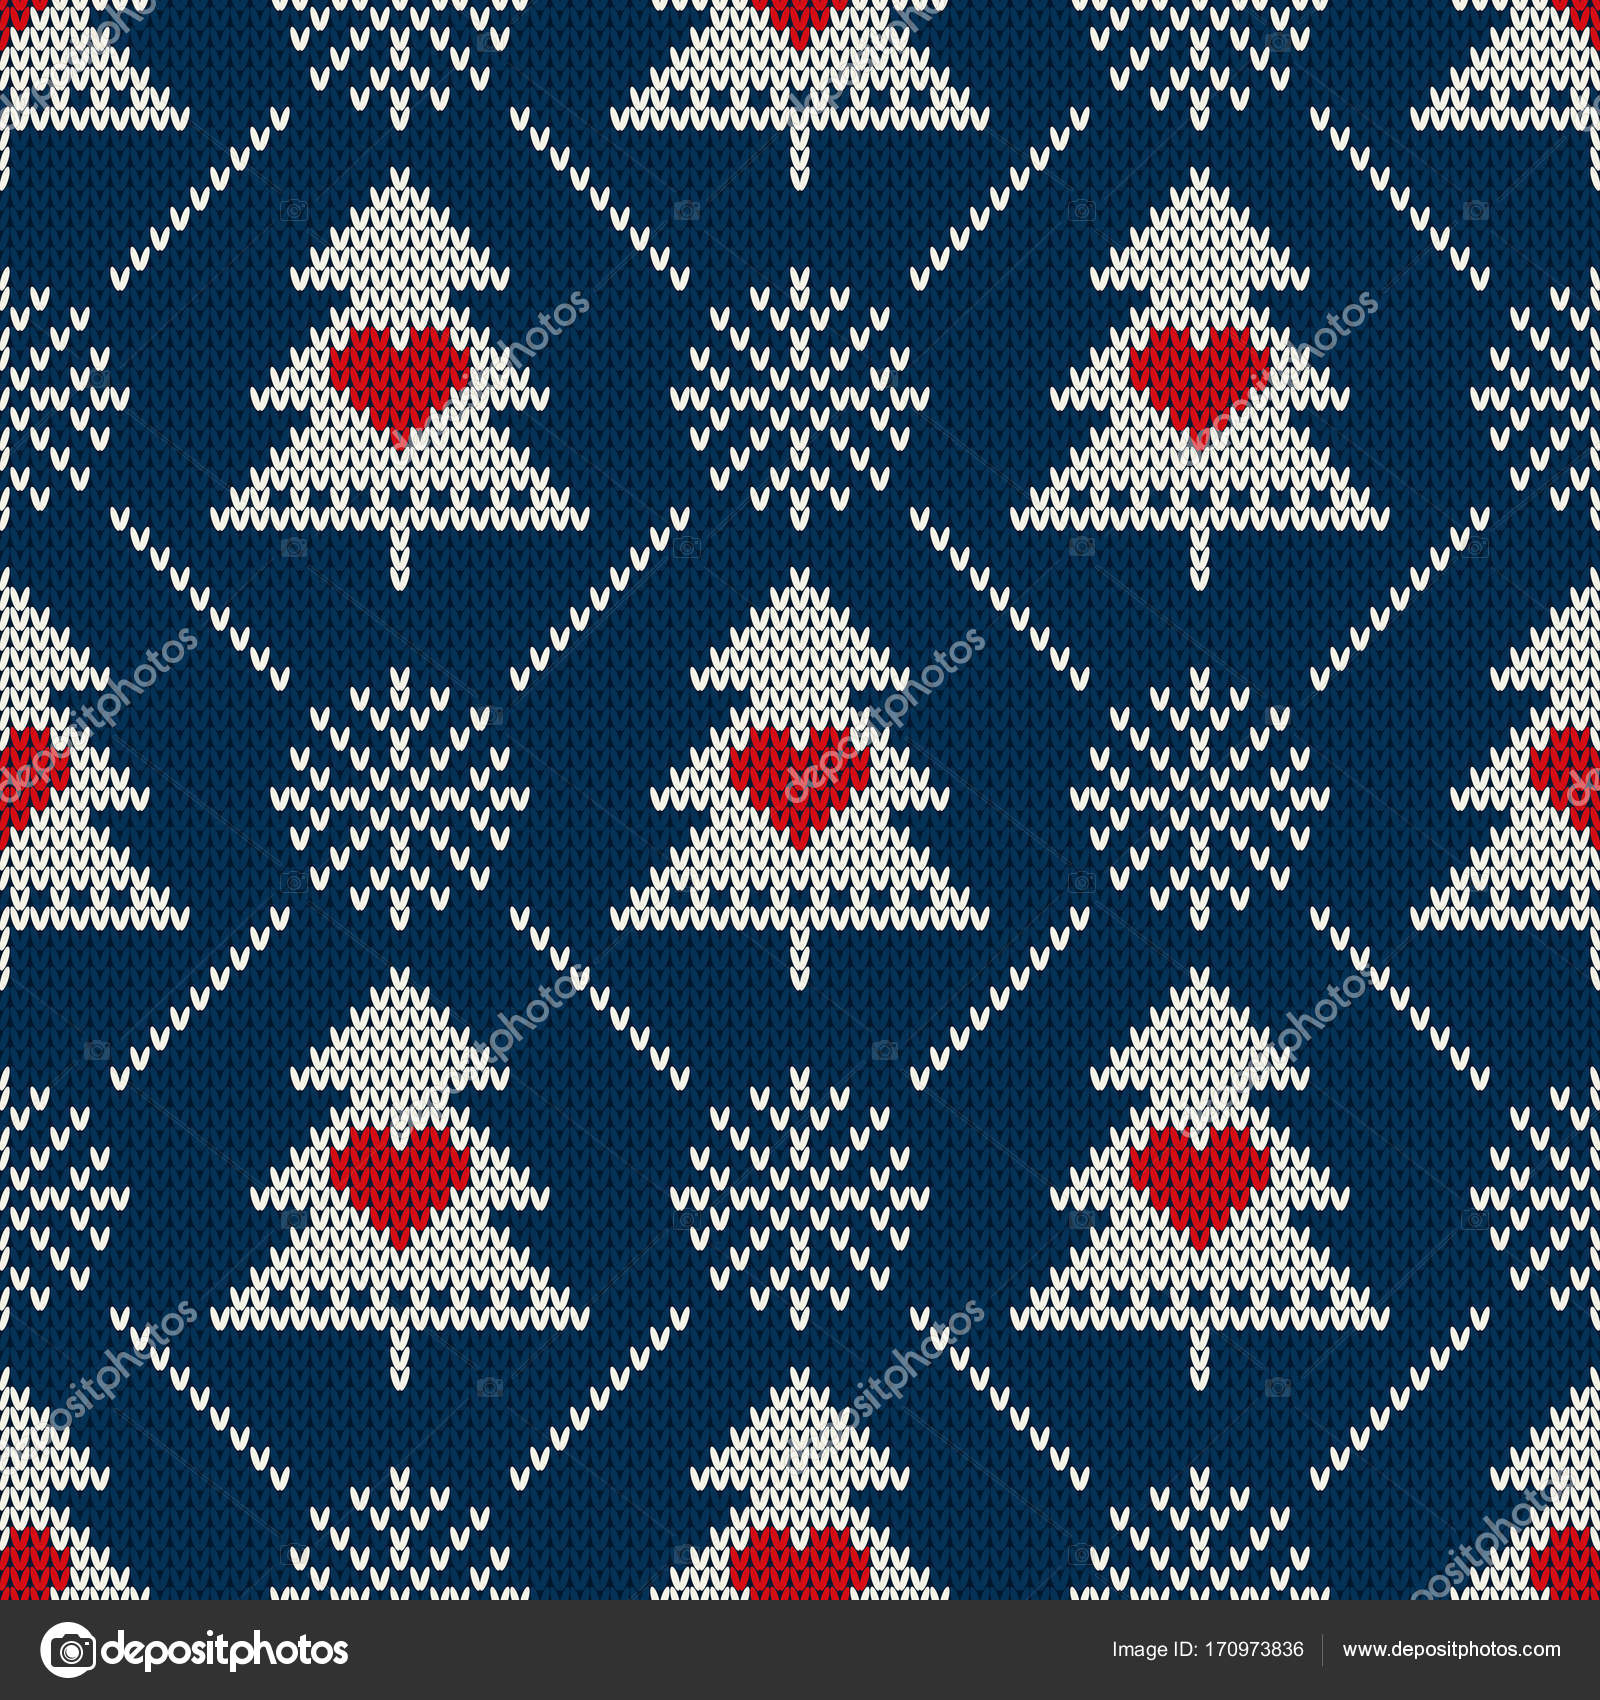 Snowflake Pattern Knitting Winter Holiday Seamless Knitted Pattern With A Christmas Symbols